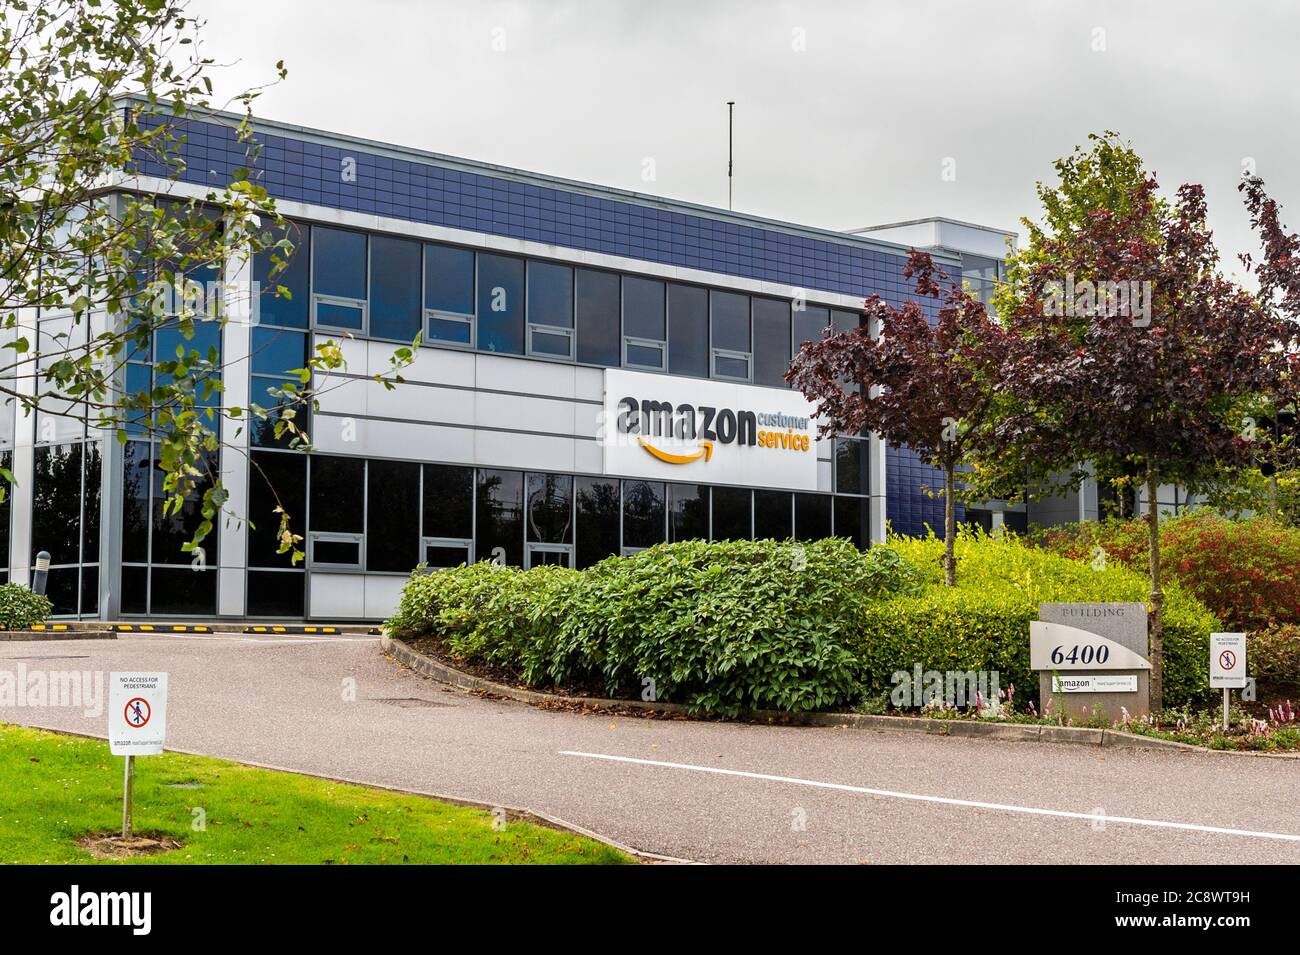 Business Park Dublin High Resolution Stock Photography and Images - Alamy